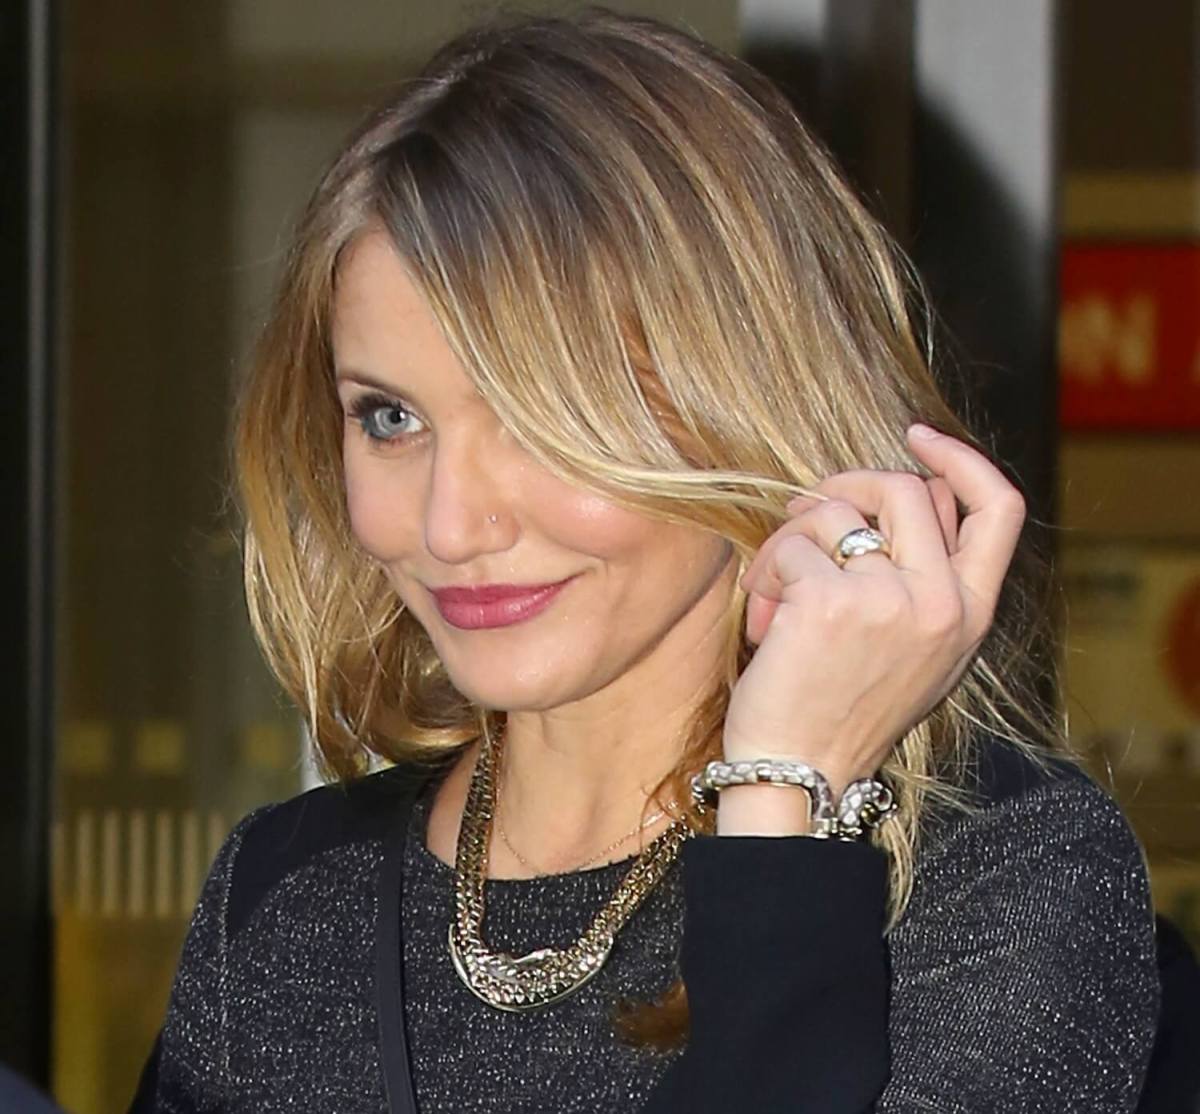 Wait, Cameron Diaz is getting married tonight? Seriously?